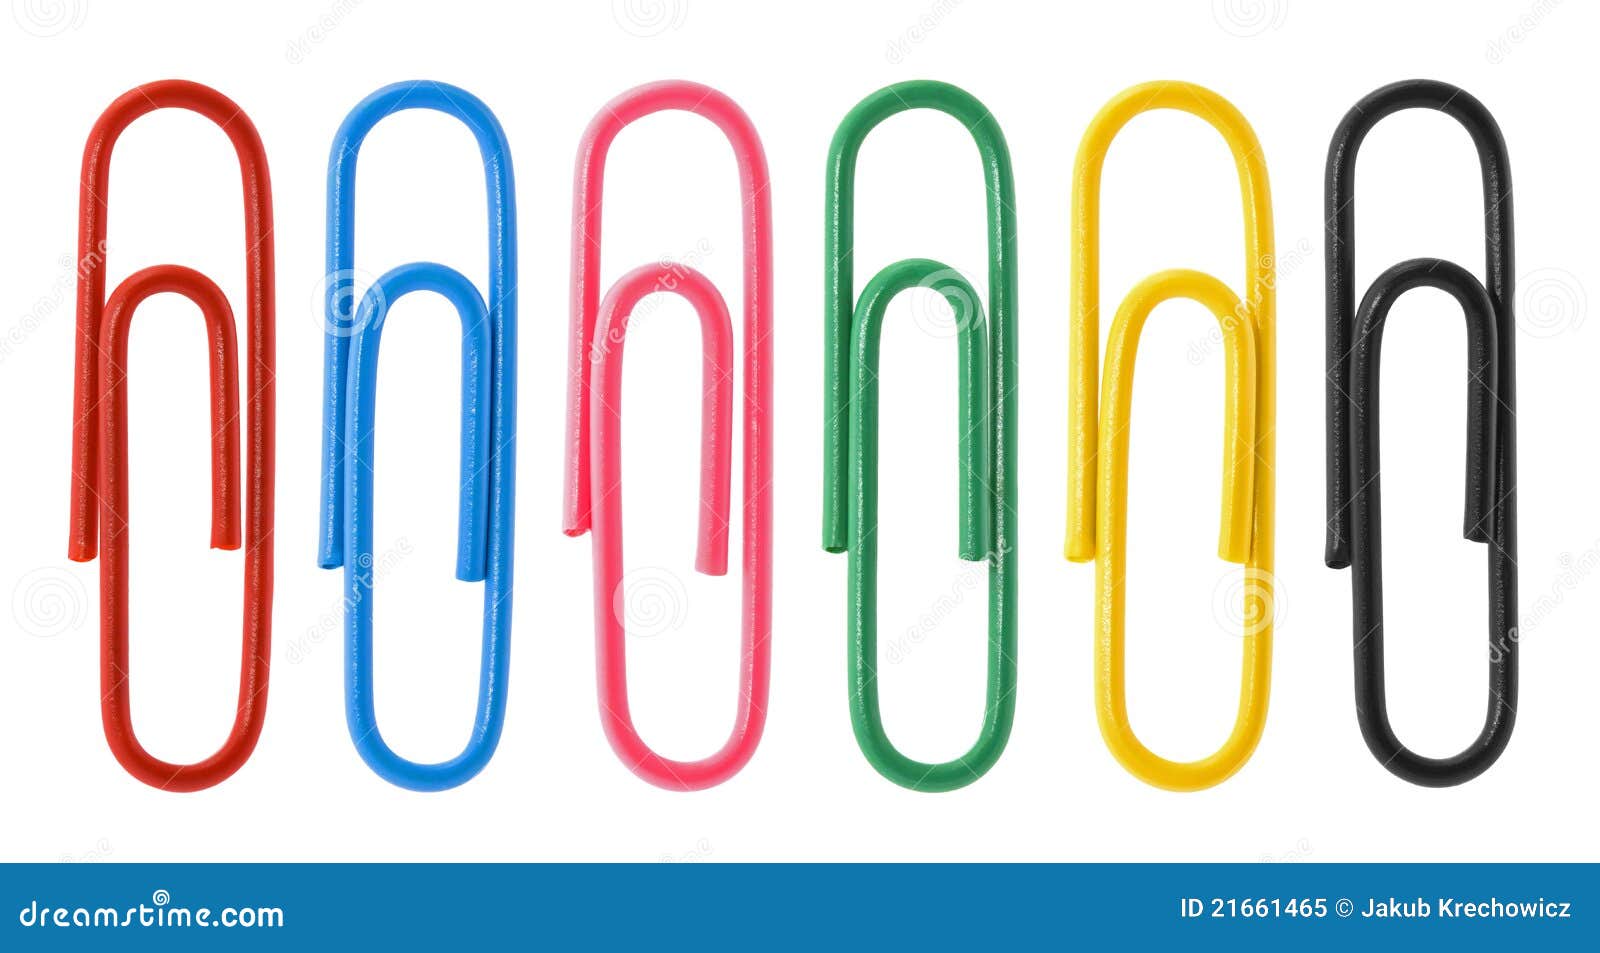 collection of colorful paper clips